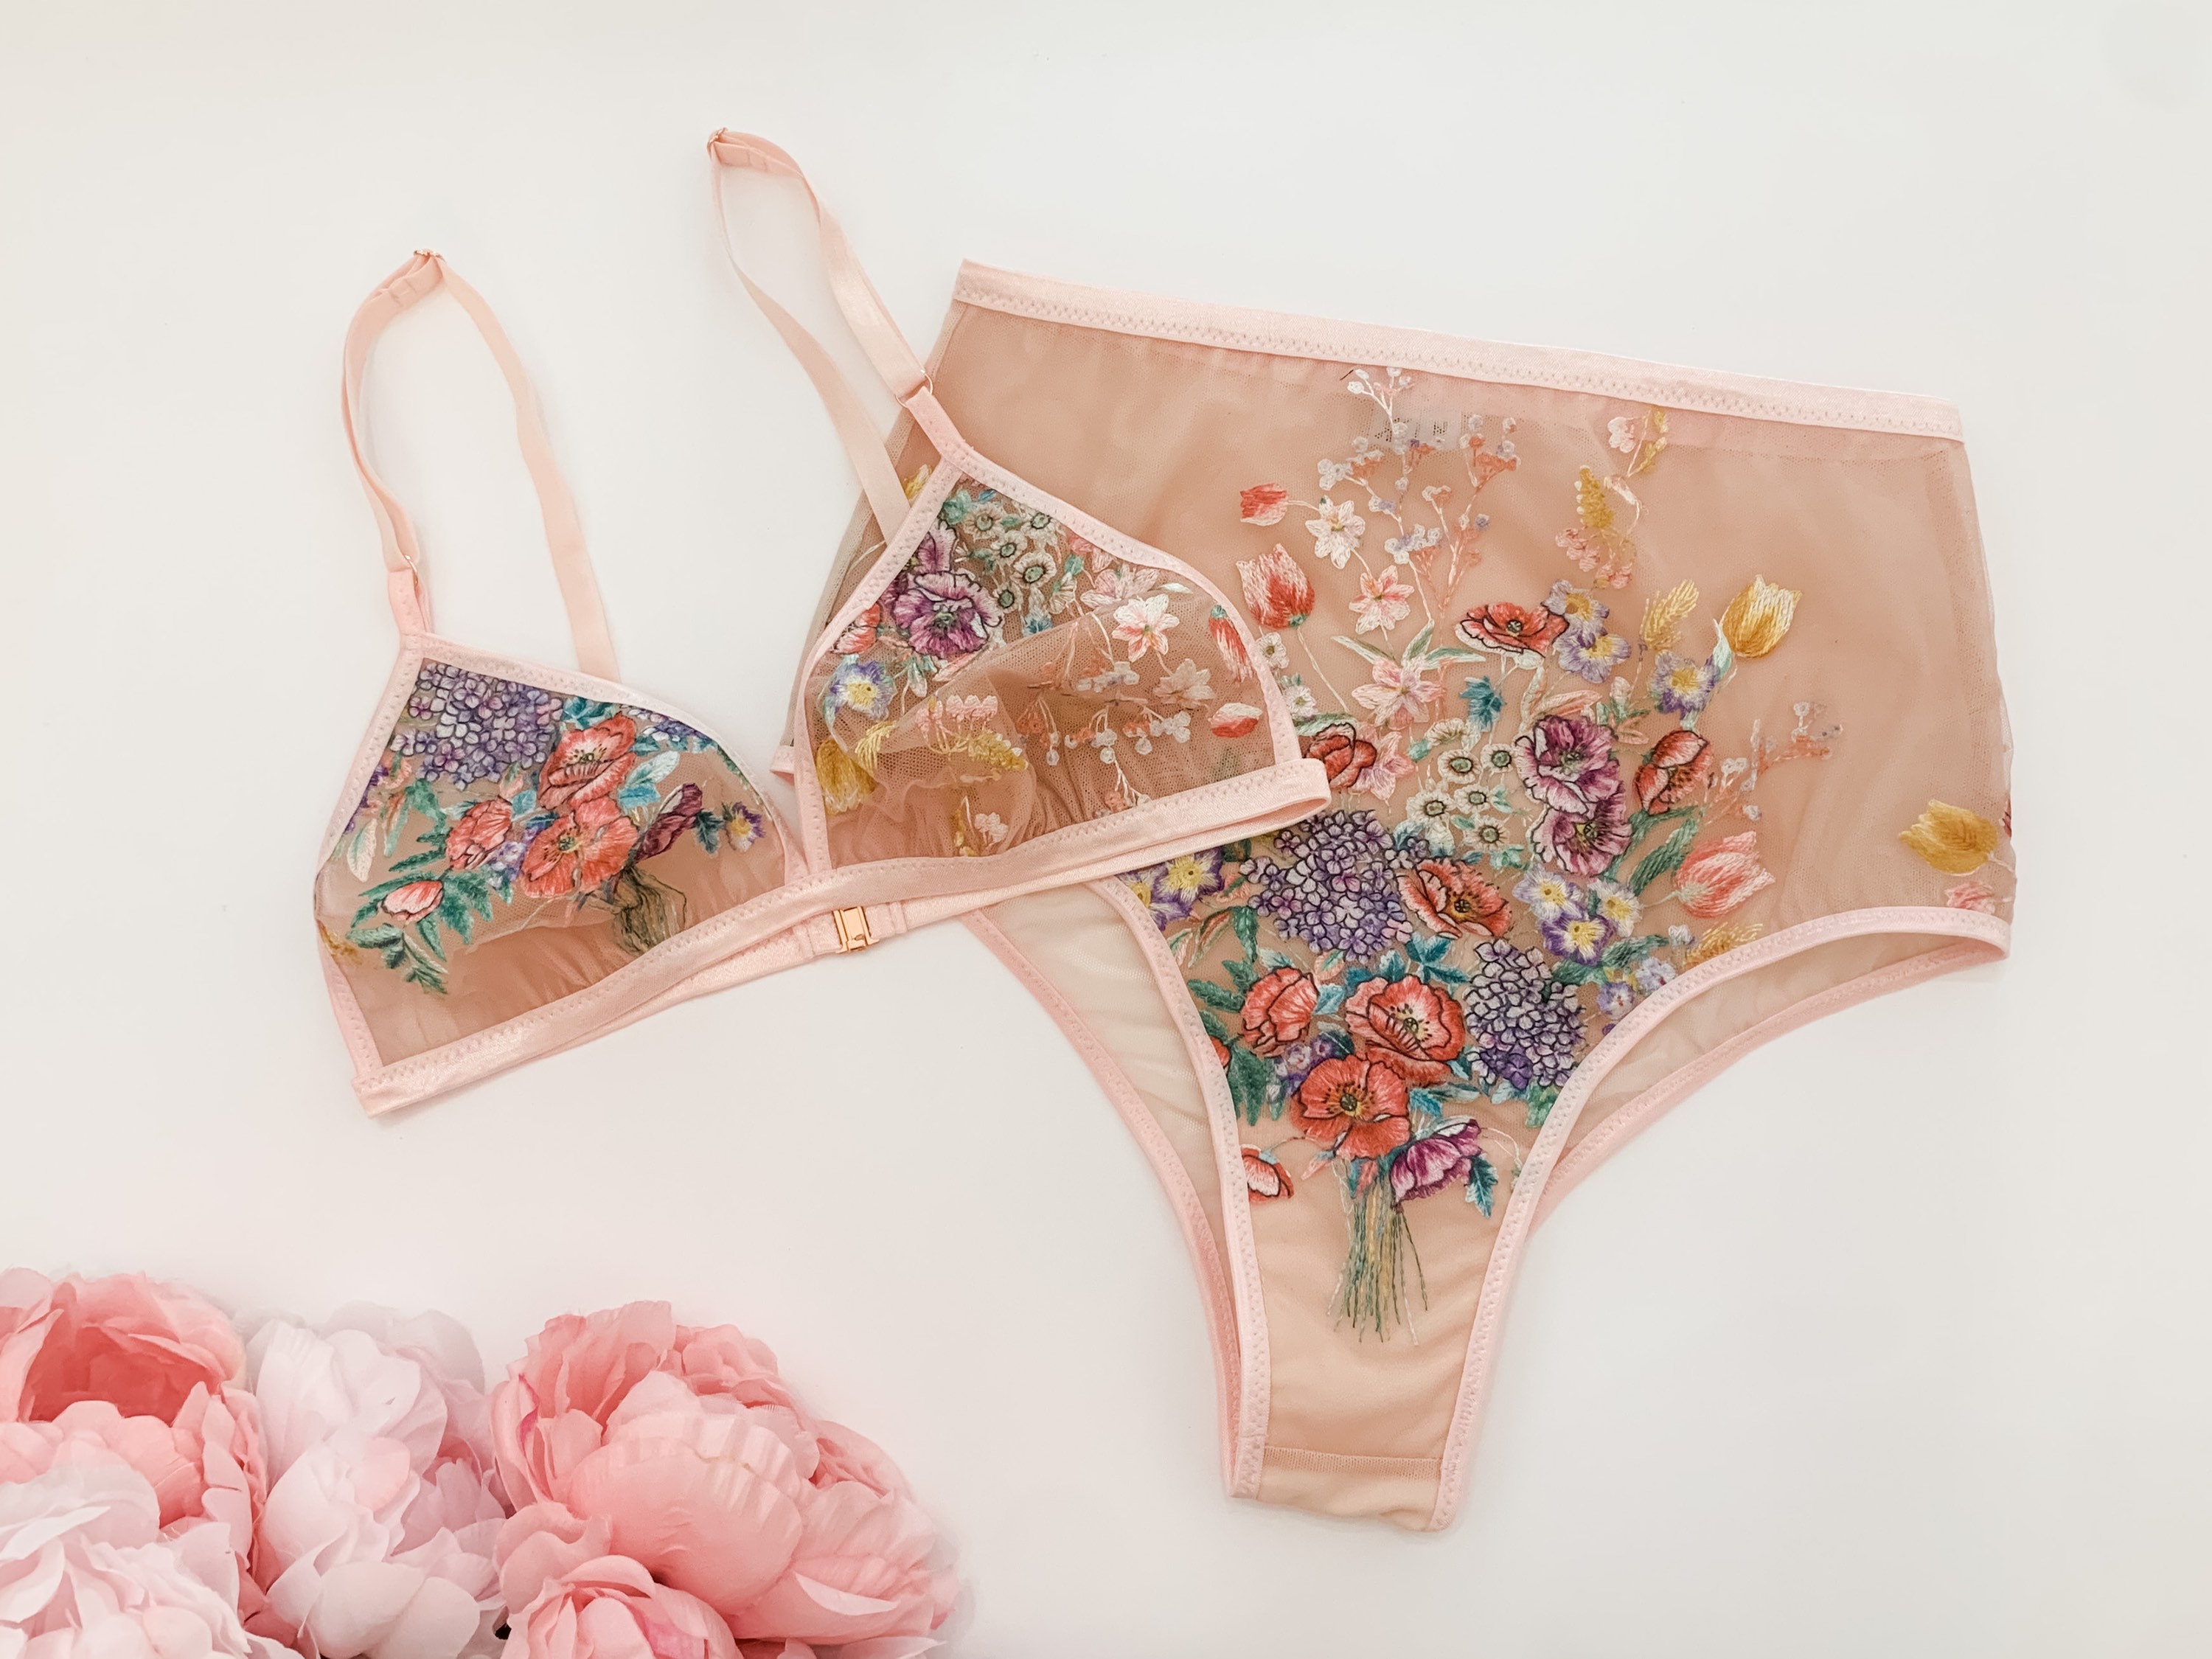 Blush Pink Embroidered Floral Lingerie Set, Boudoir Lingerie, High Rise  Panties, Embroidery, Bridal Lingerie -  Canada